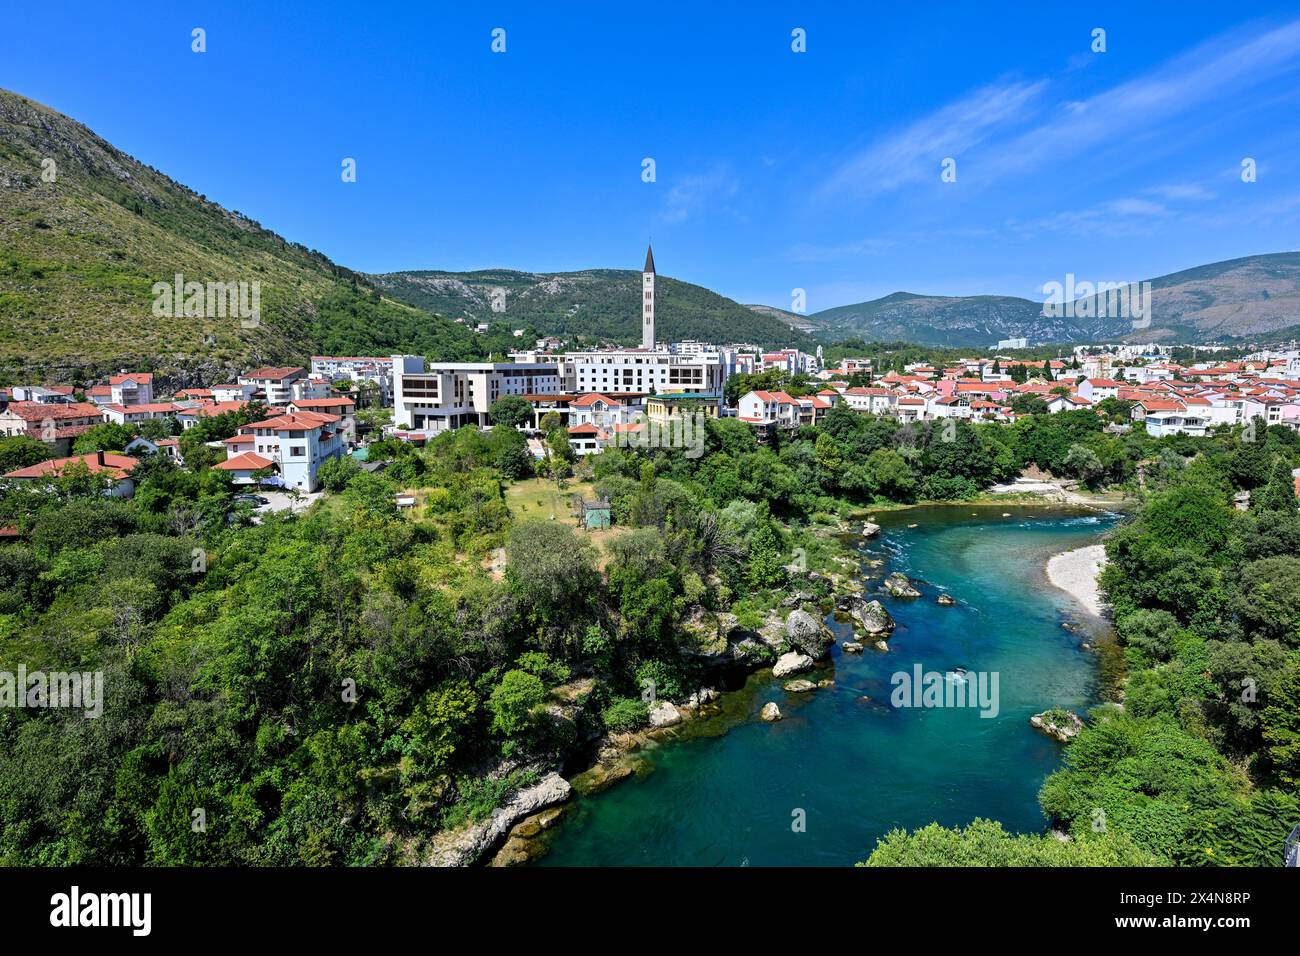 Franciscan monastery and church of St. Peter and Paul in the city of Mostar, Bosnia and Herzegovina. Stock Photo